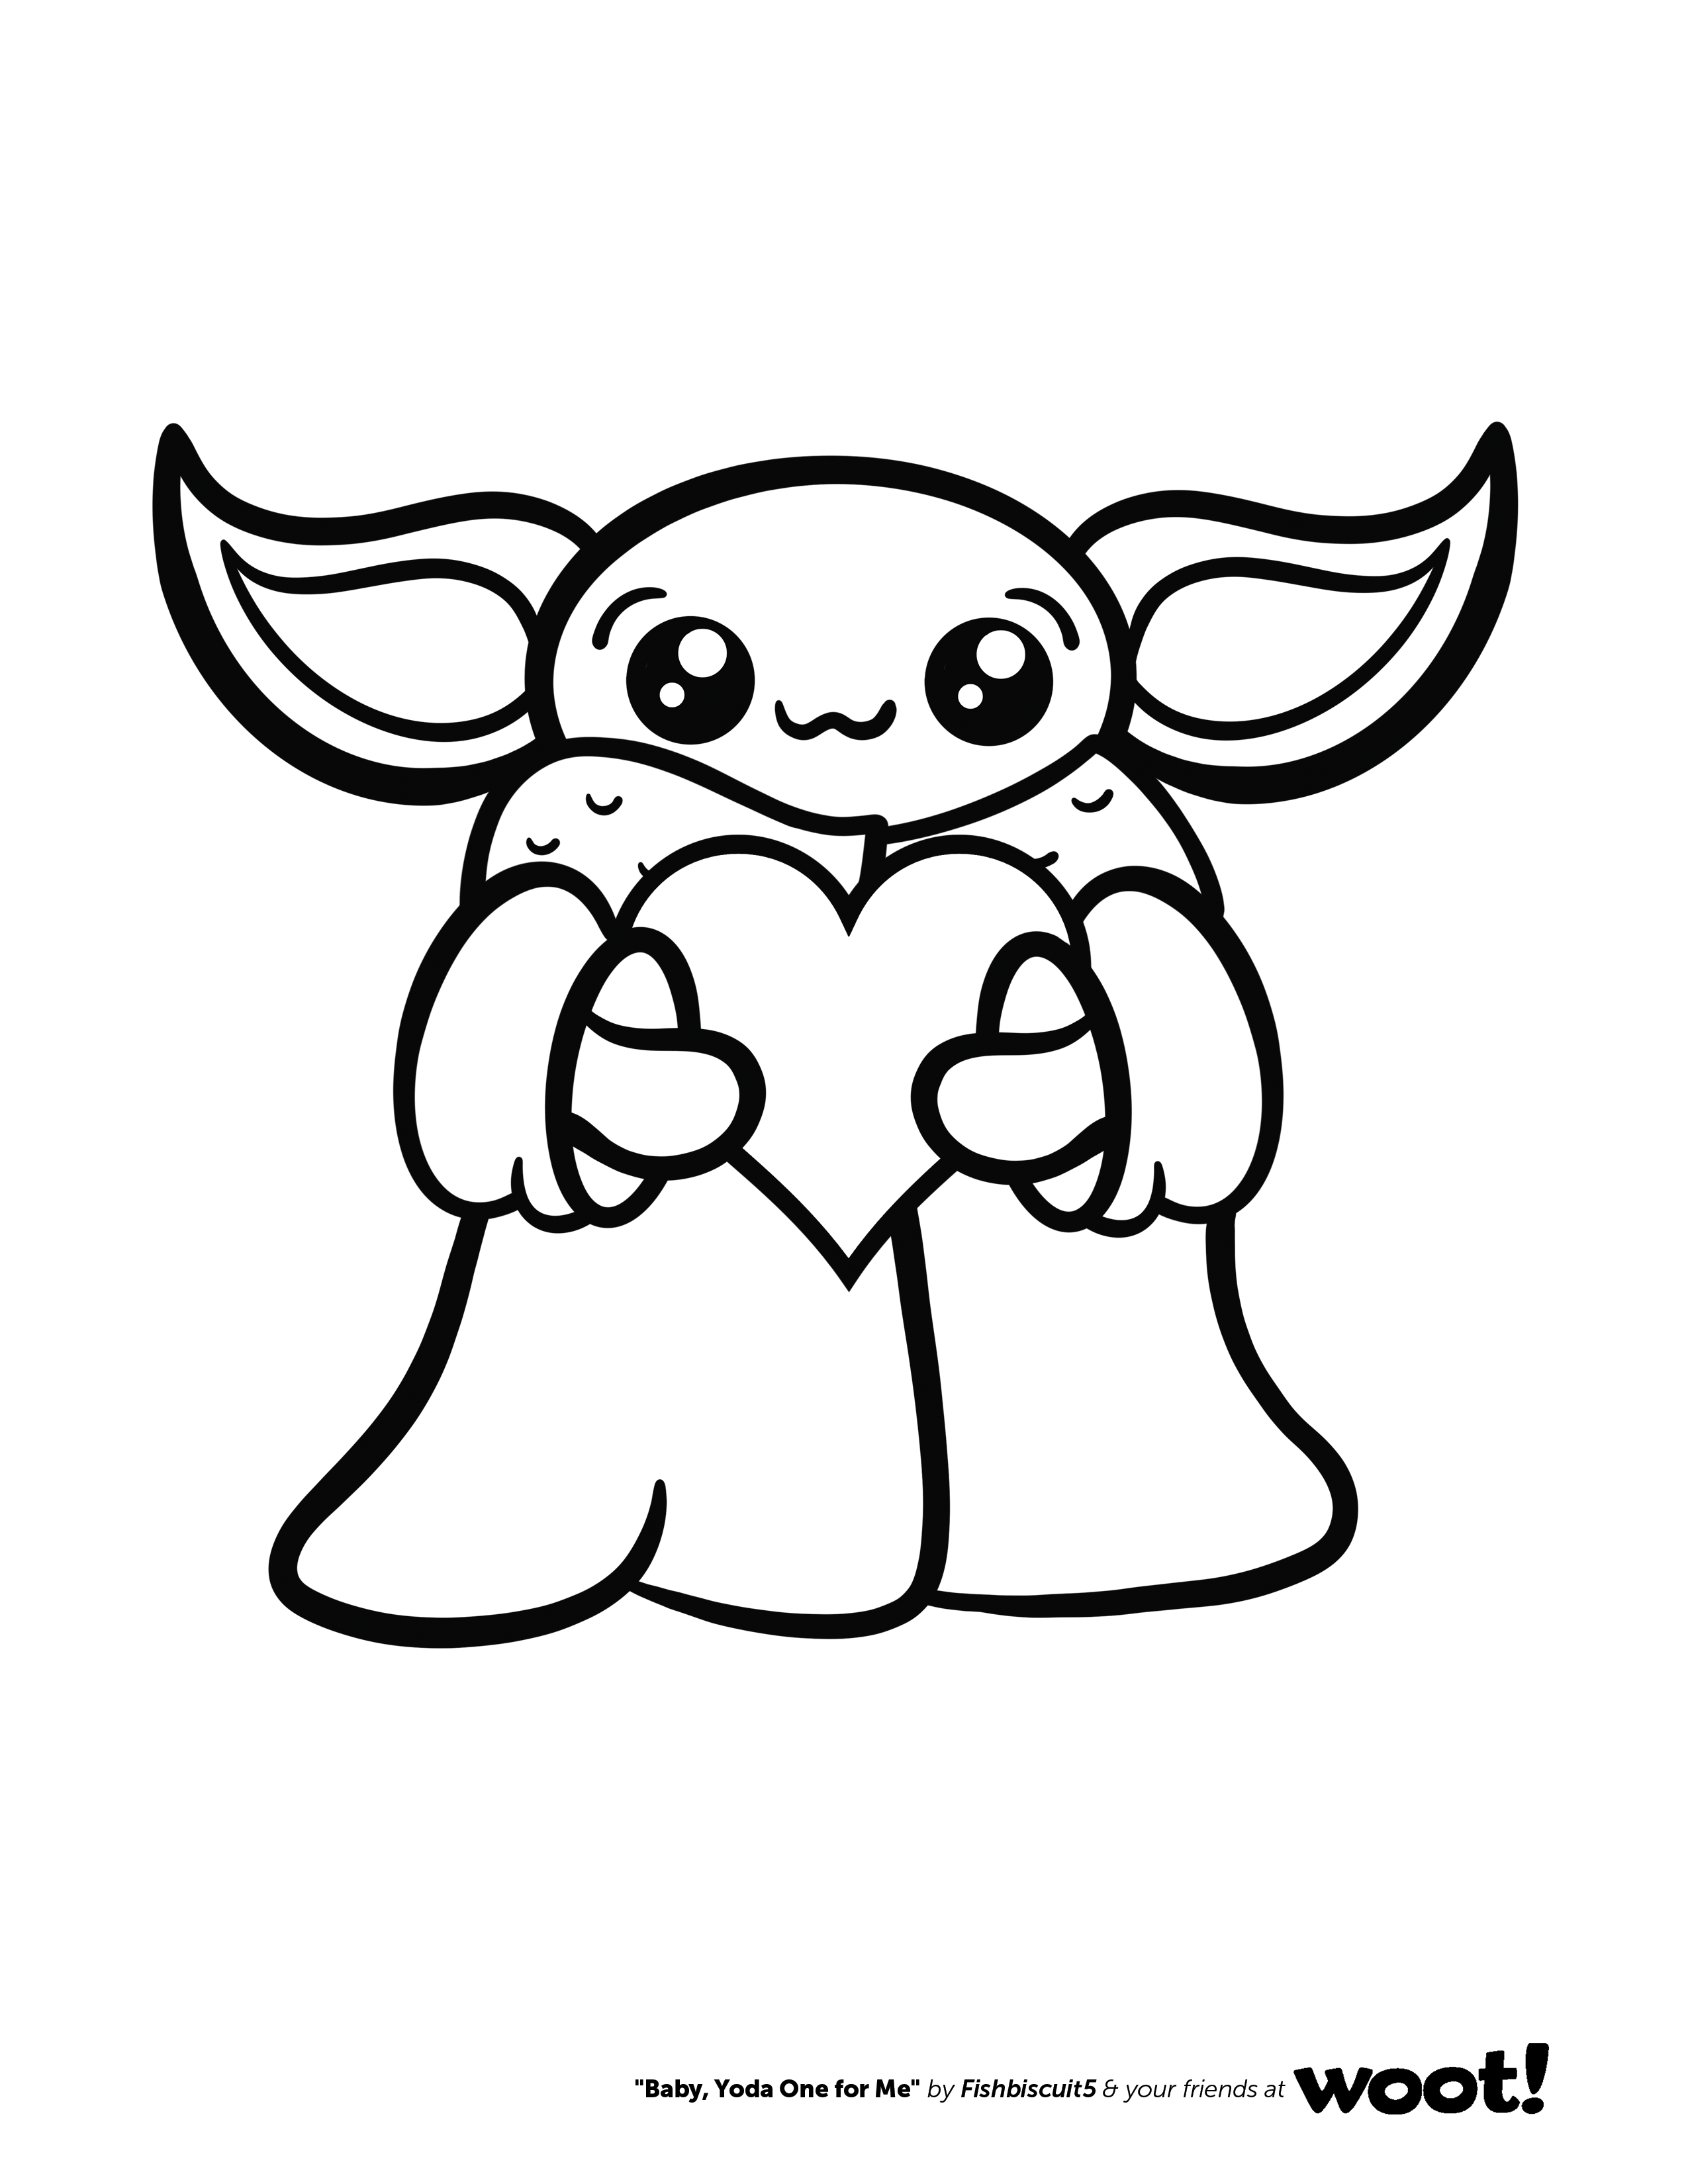 Coloring Pages : Tremendous Yoda Coloring Pages Photo Inspirationse Free Star  Wars 46 Tremendous Yoda Coloring Pages Photo Inspirations ~ Off-The Wall ATL